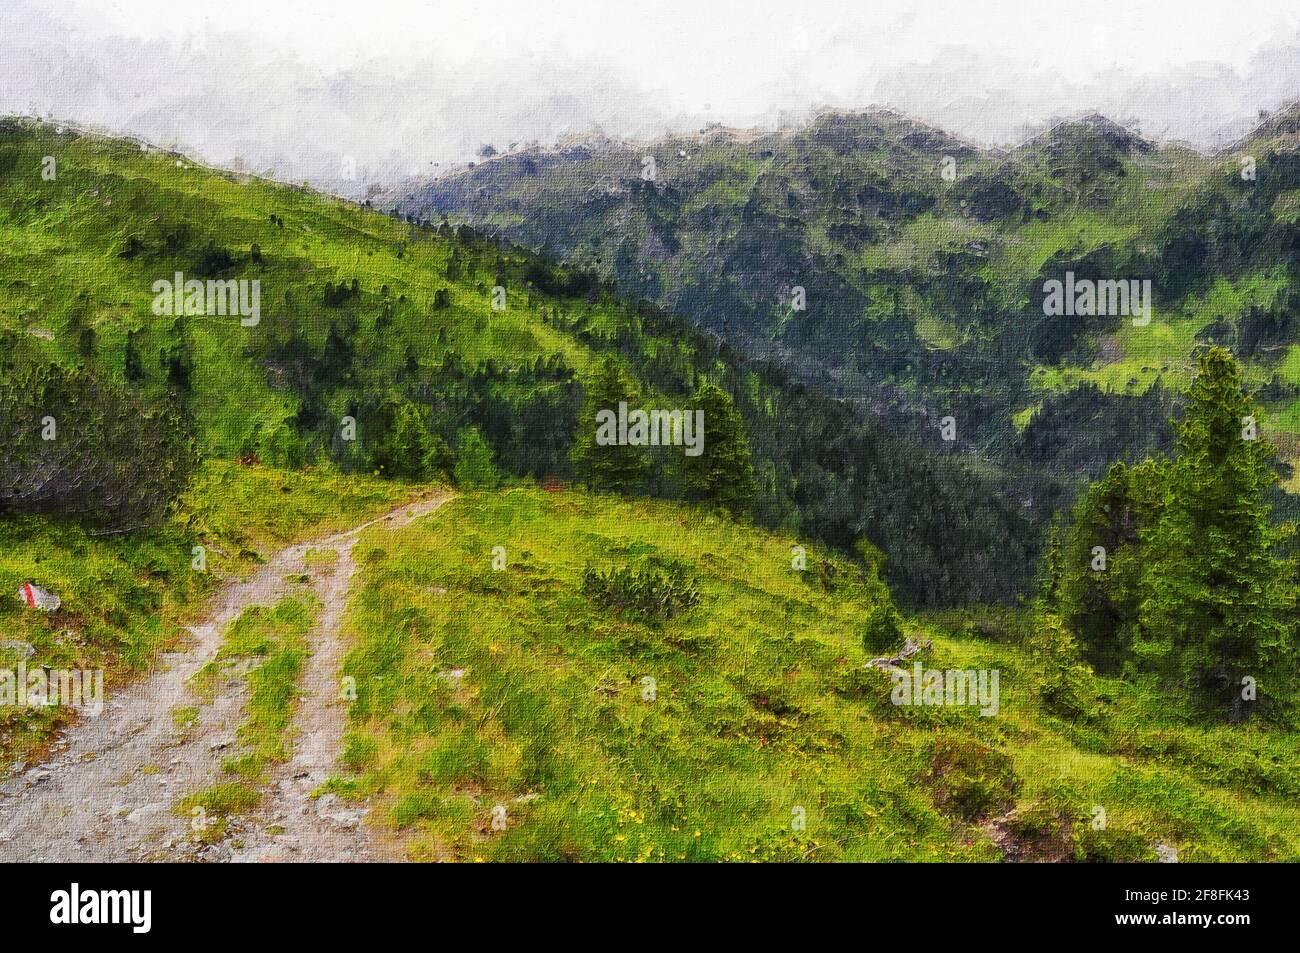 Oil painting canvas of High Tauern hiking path within Zillertal Alps in Austria. Stock Photo